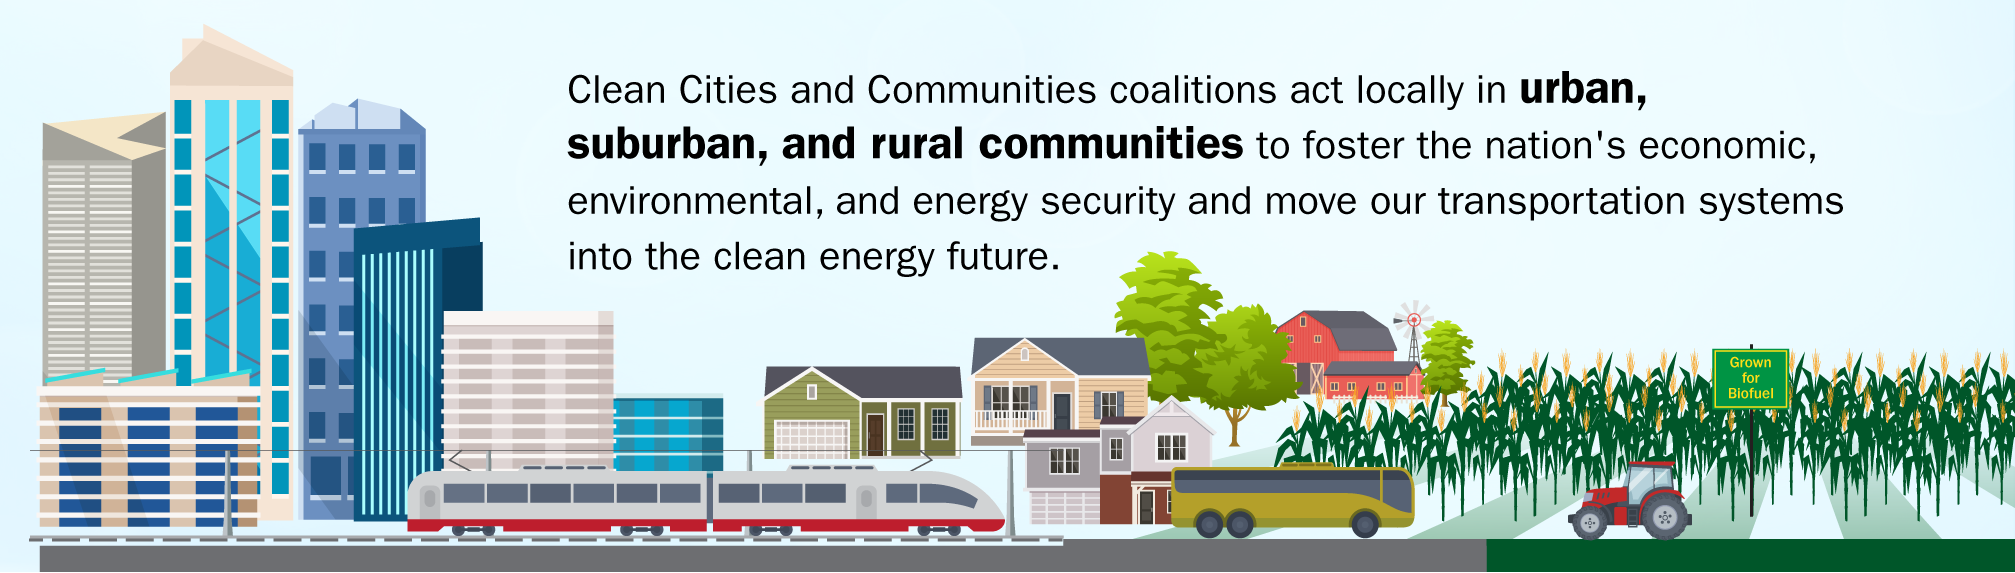 Clean Cities and Communities coalitions act locally in urban, suburban, and rural communities to foster the nation's economic, environmental, and energy security and move our transportation systems into the clean energy future.